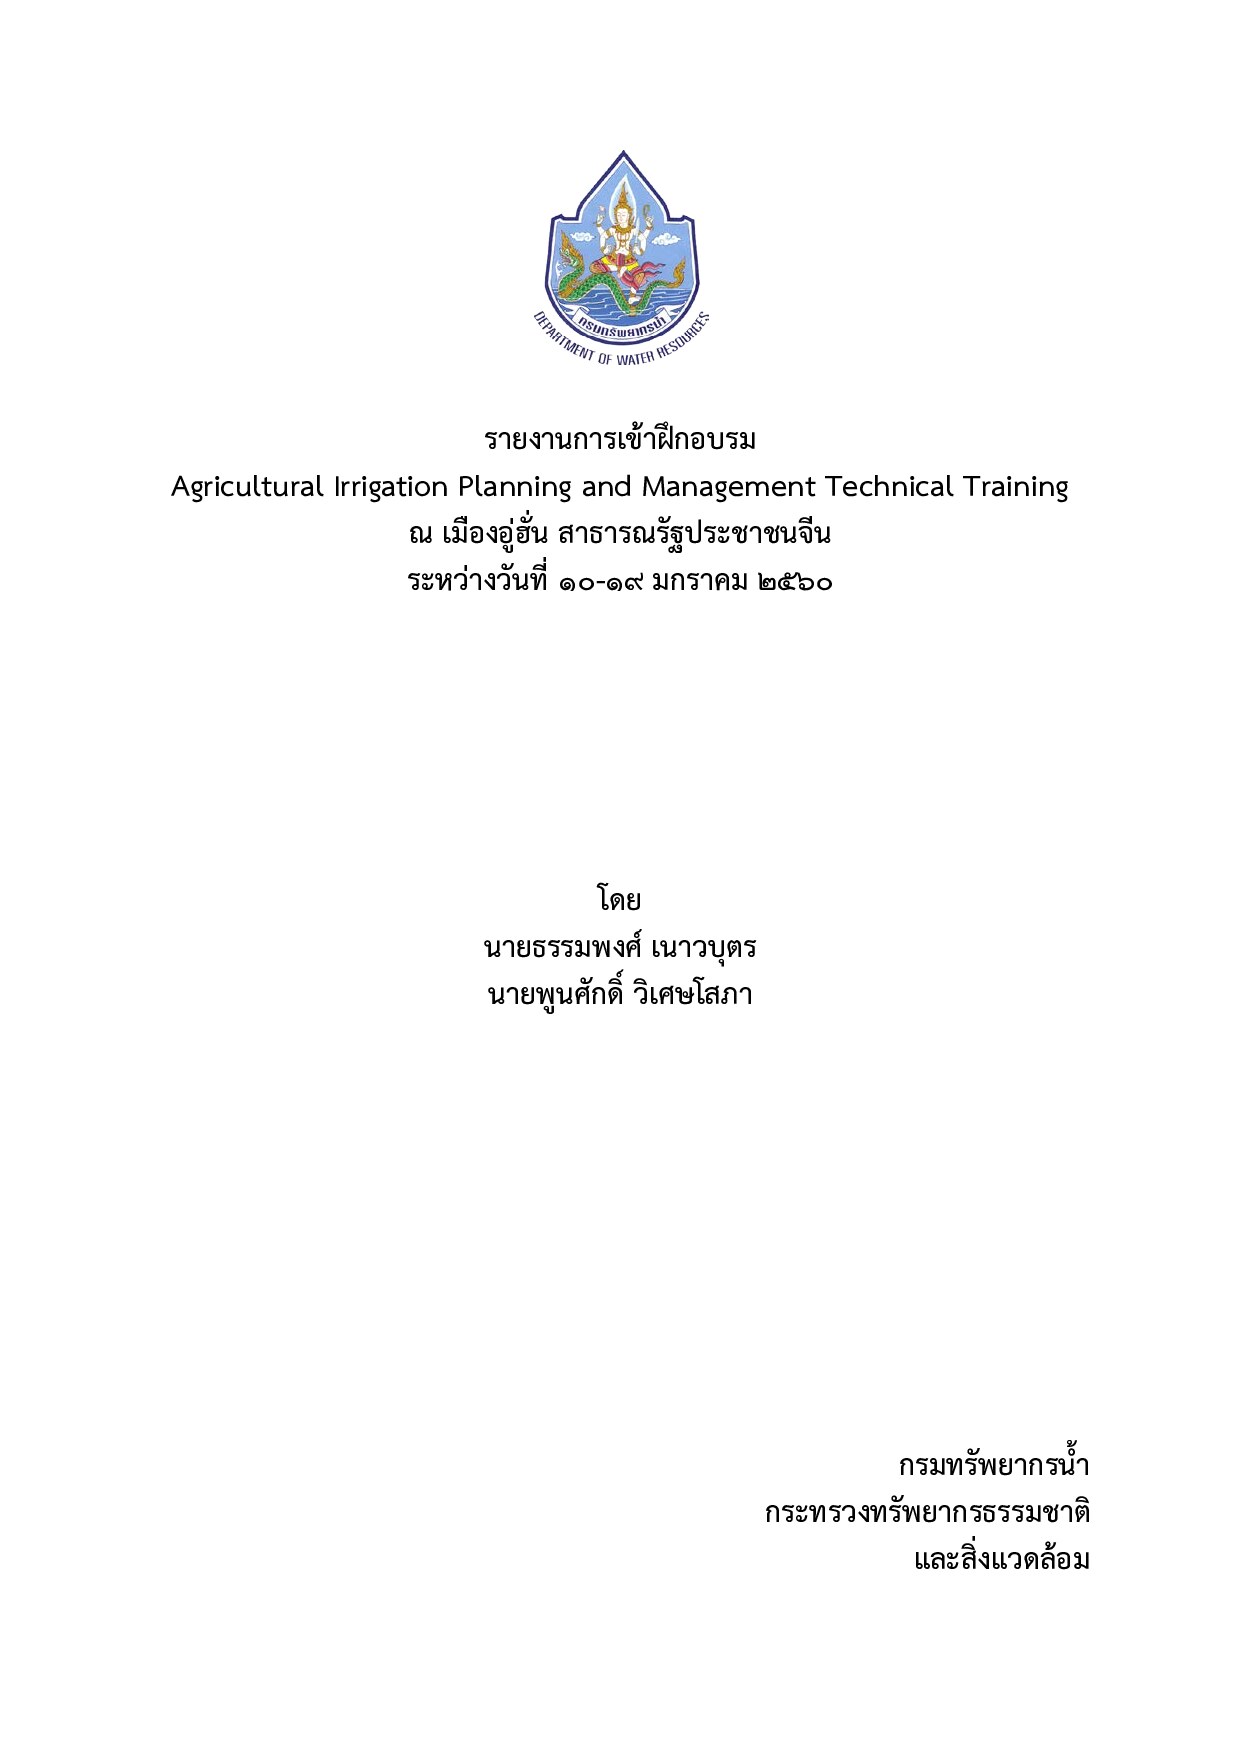 Agricultural Irrigation Planning and Management Technical Training Report